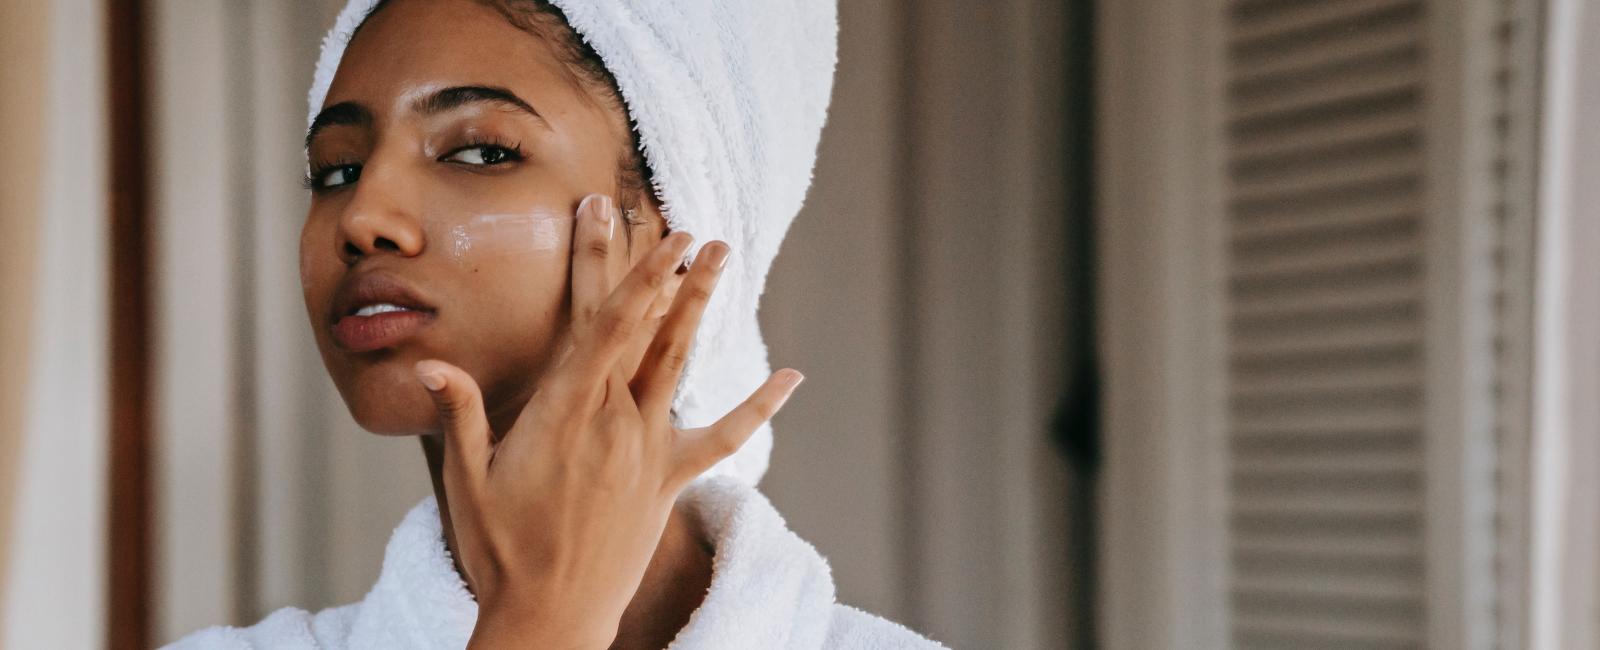 Black beauty - 7 tips for a youthful glowing skin naturally